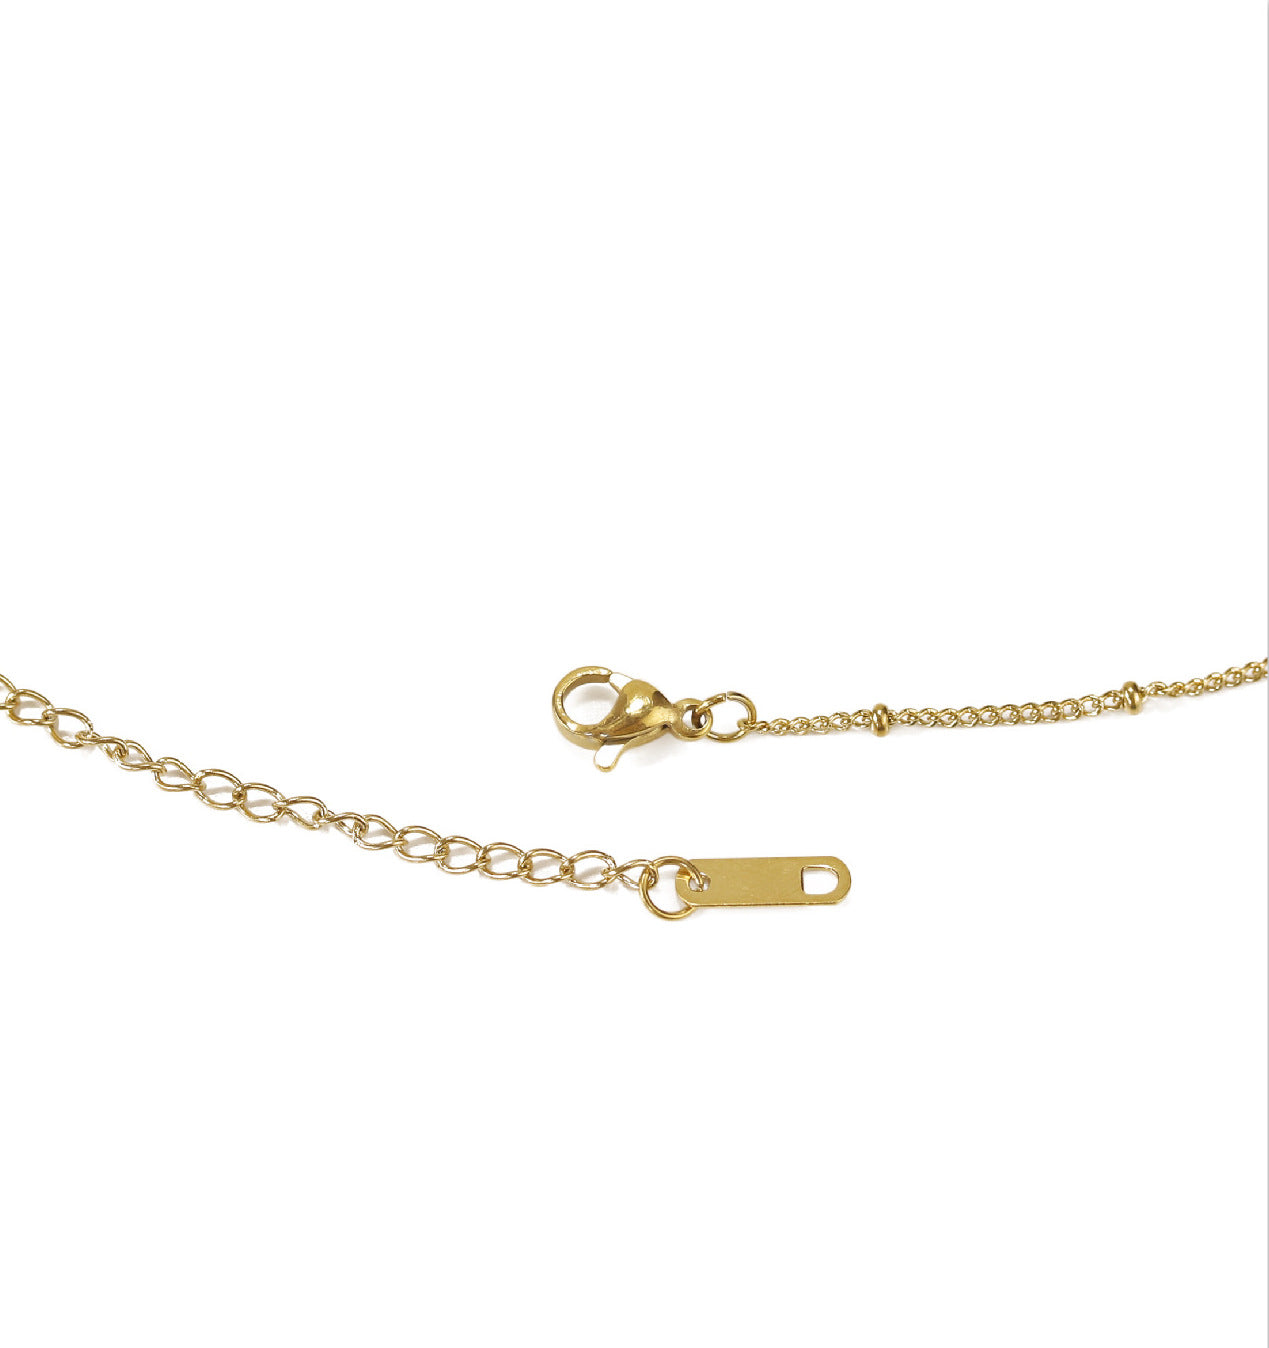 Gold-Plated Brass And Zirconia Square Pendant Necklace